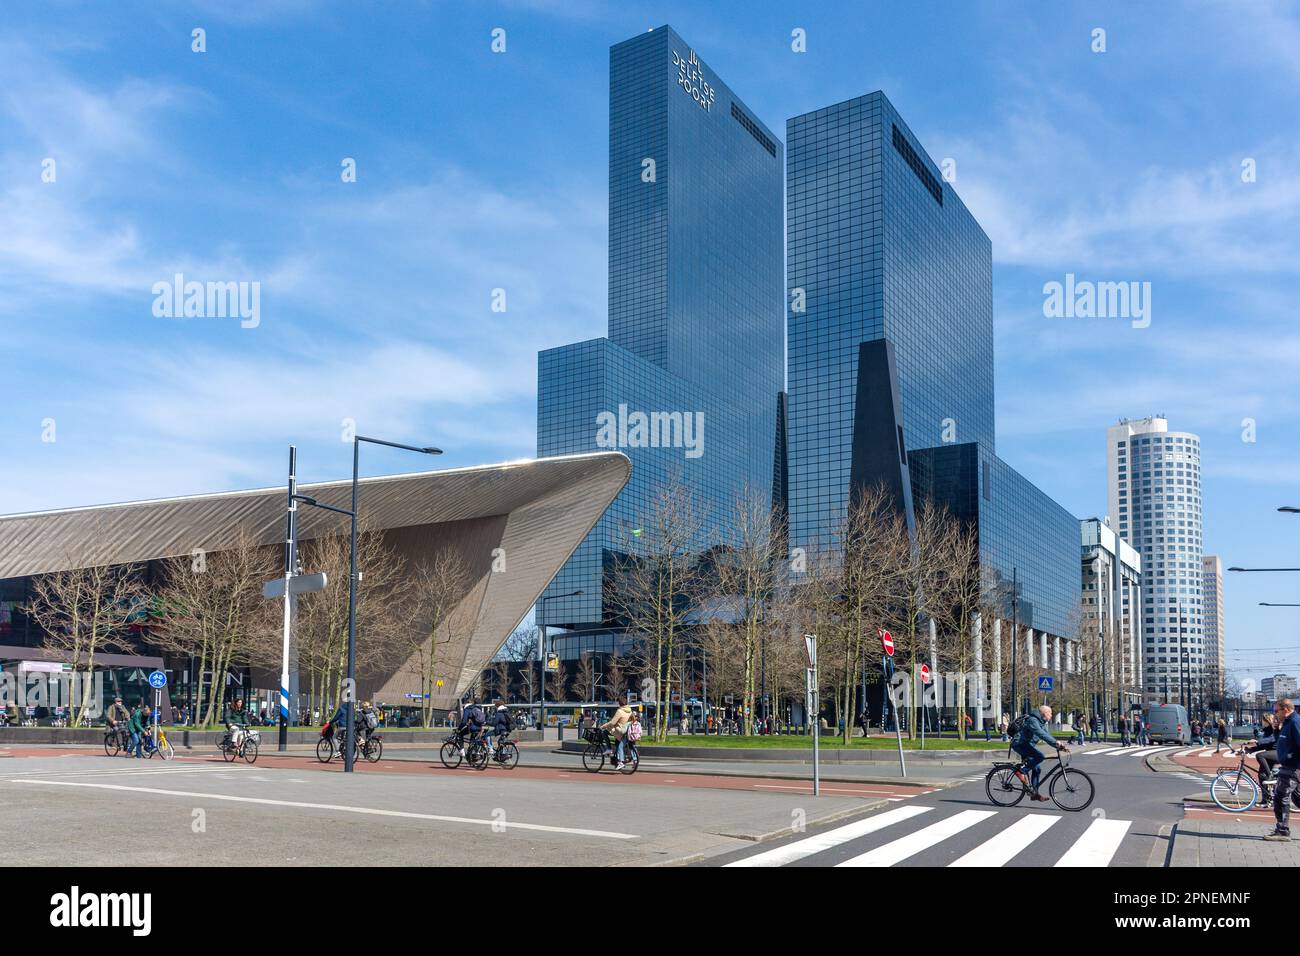 Rotterdam Centraal Station and Delftse Poort Building, Weena, Rotterdam Centrum, Rotterdam, South Holland Province, Kingdom of the Netherlands Stock Photo